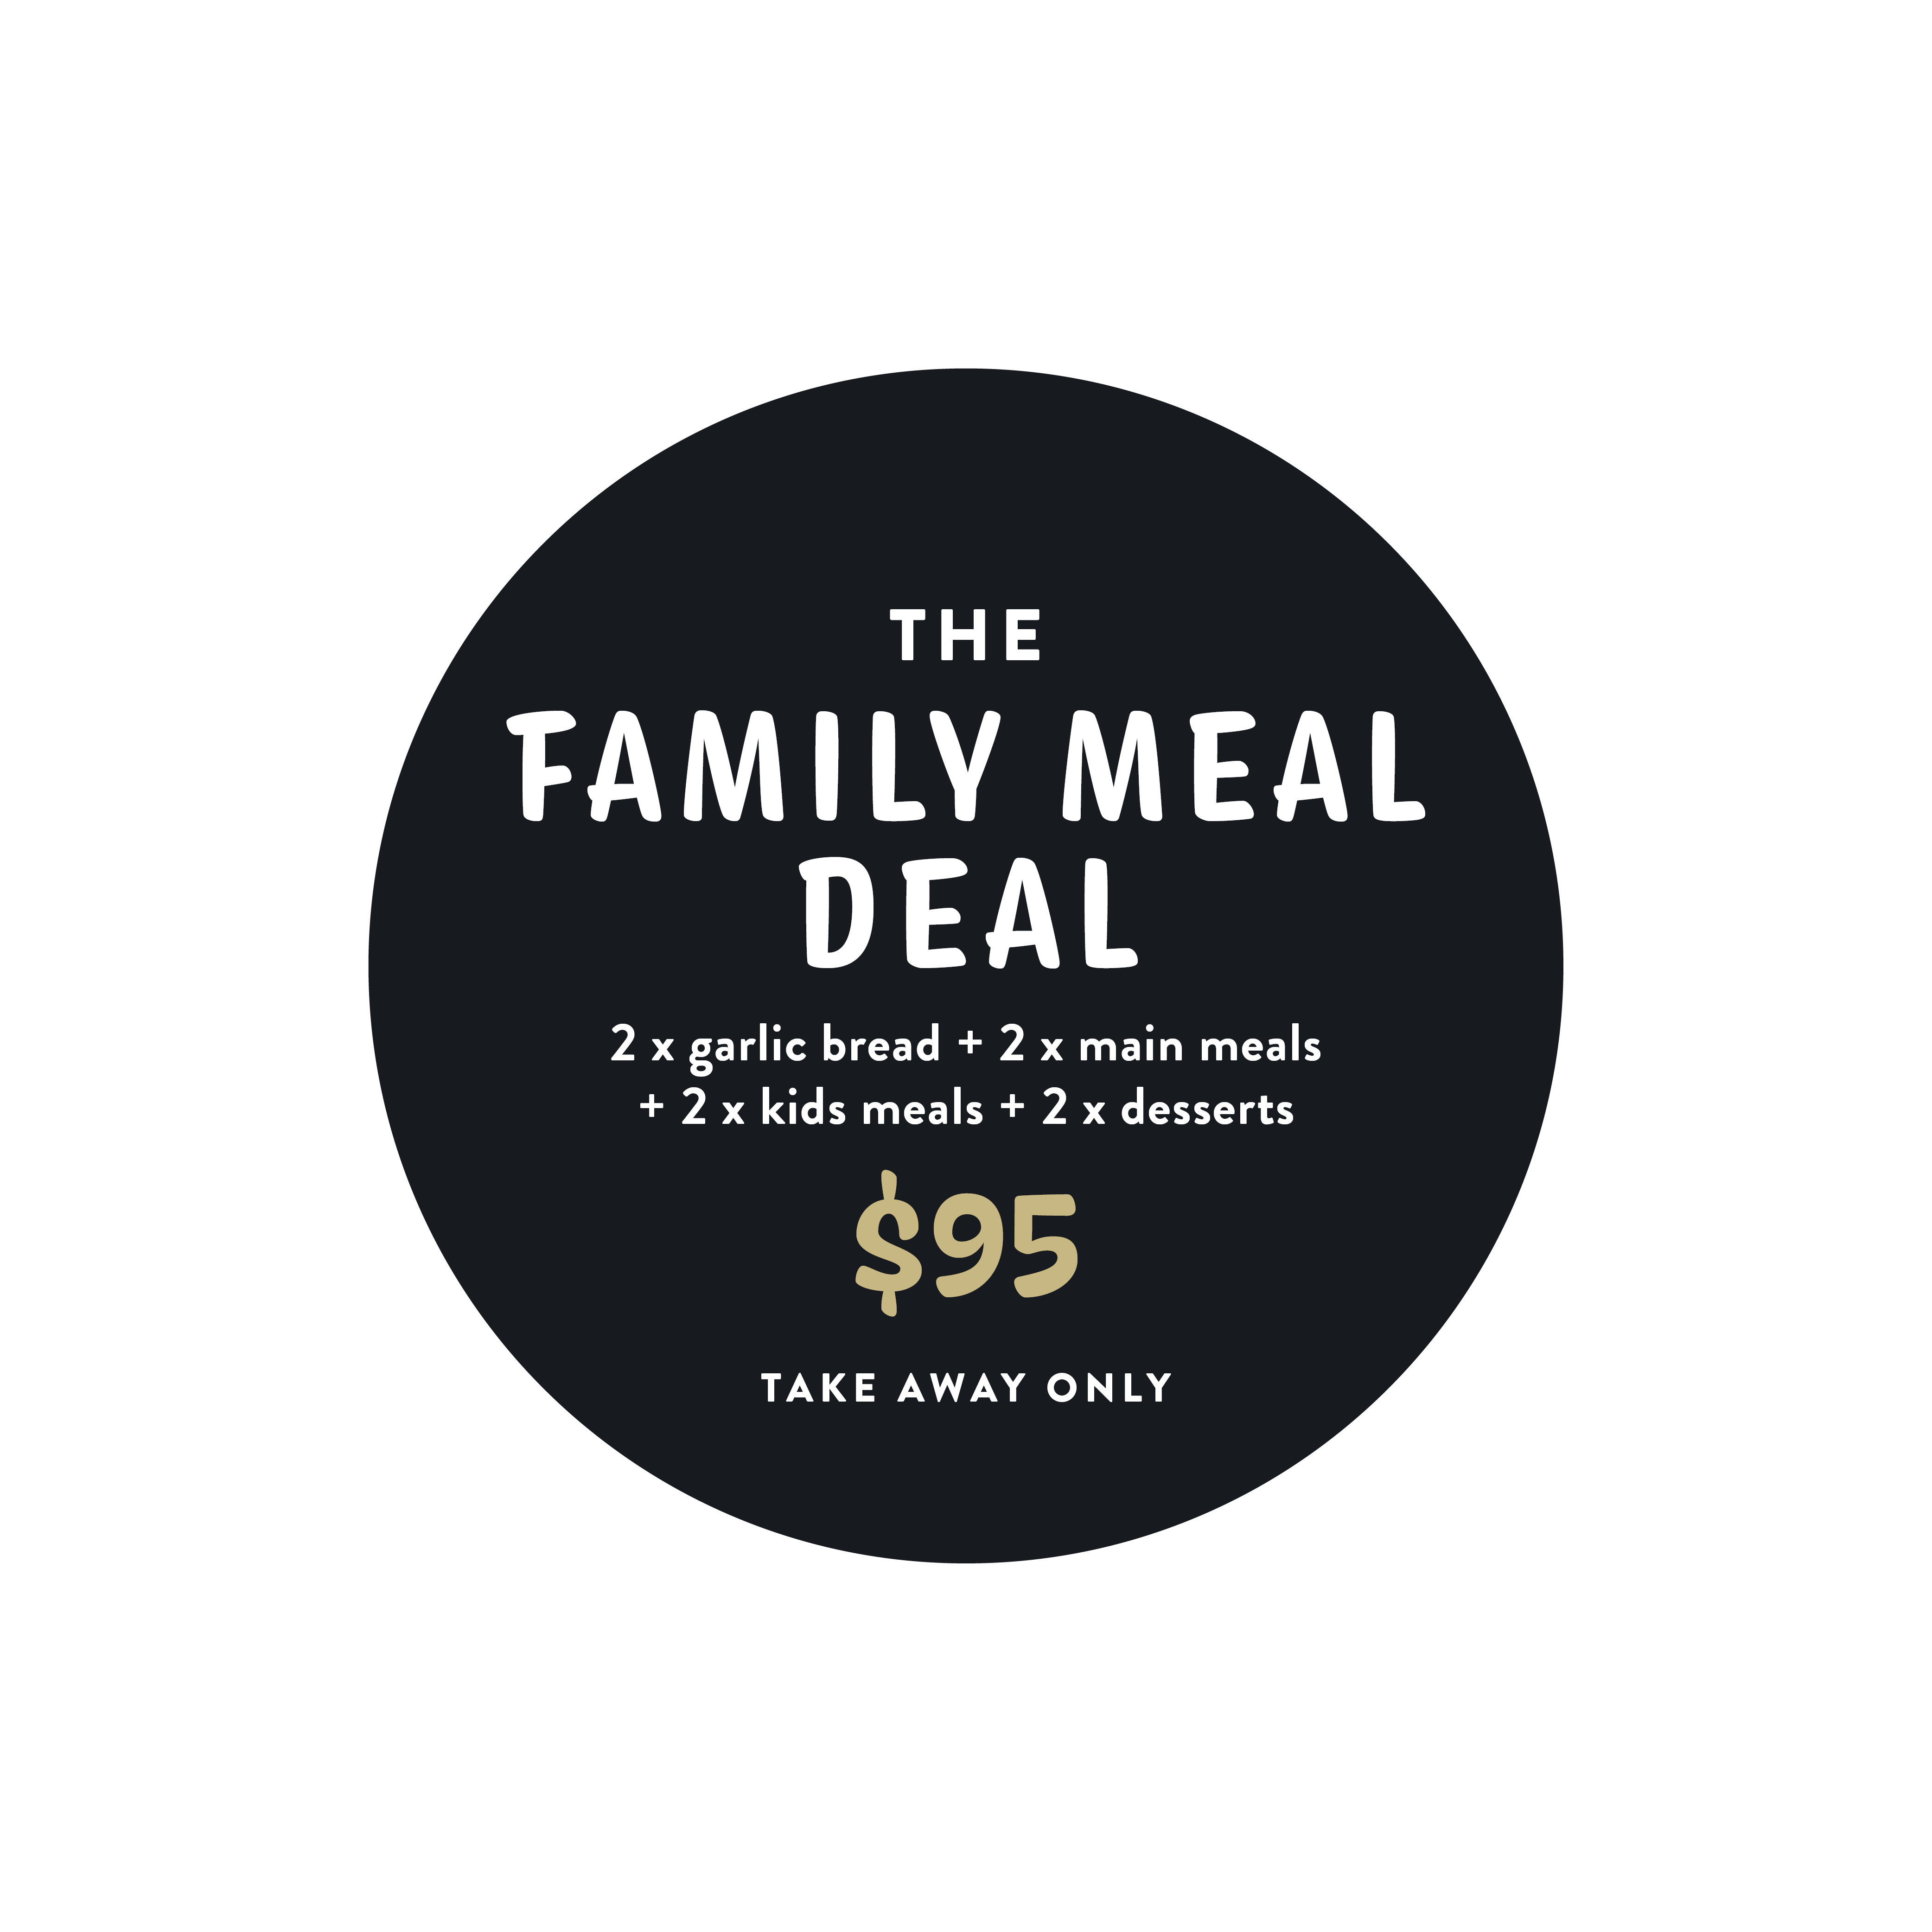 Family meal deal - take away only